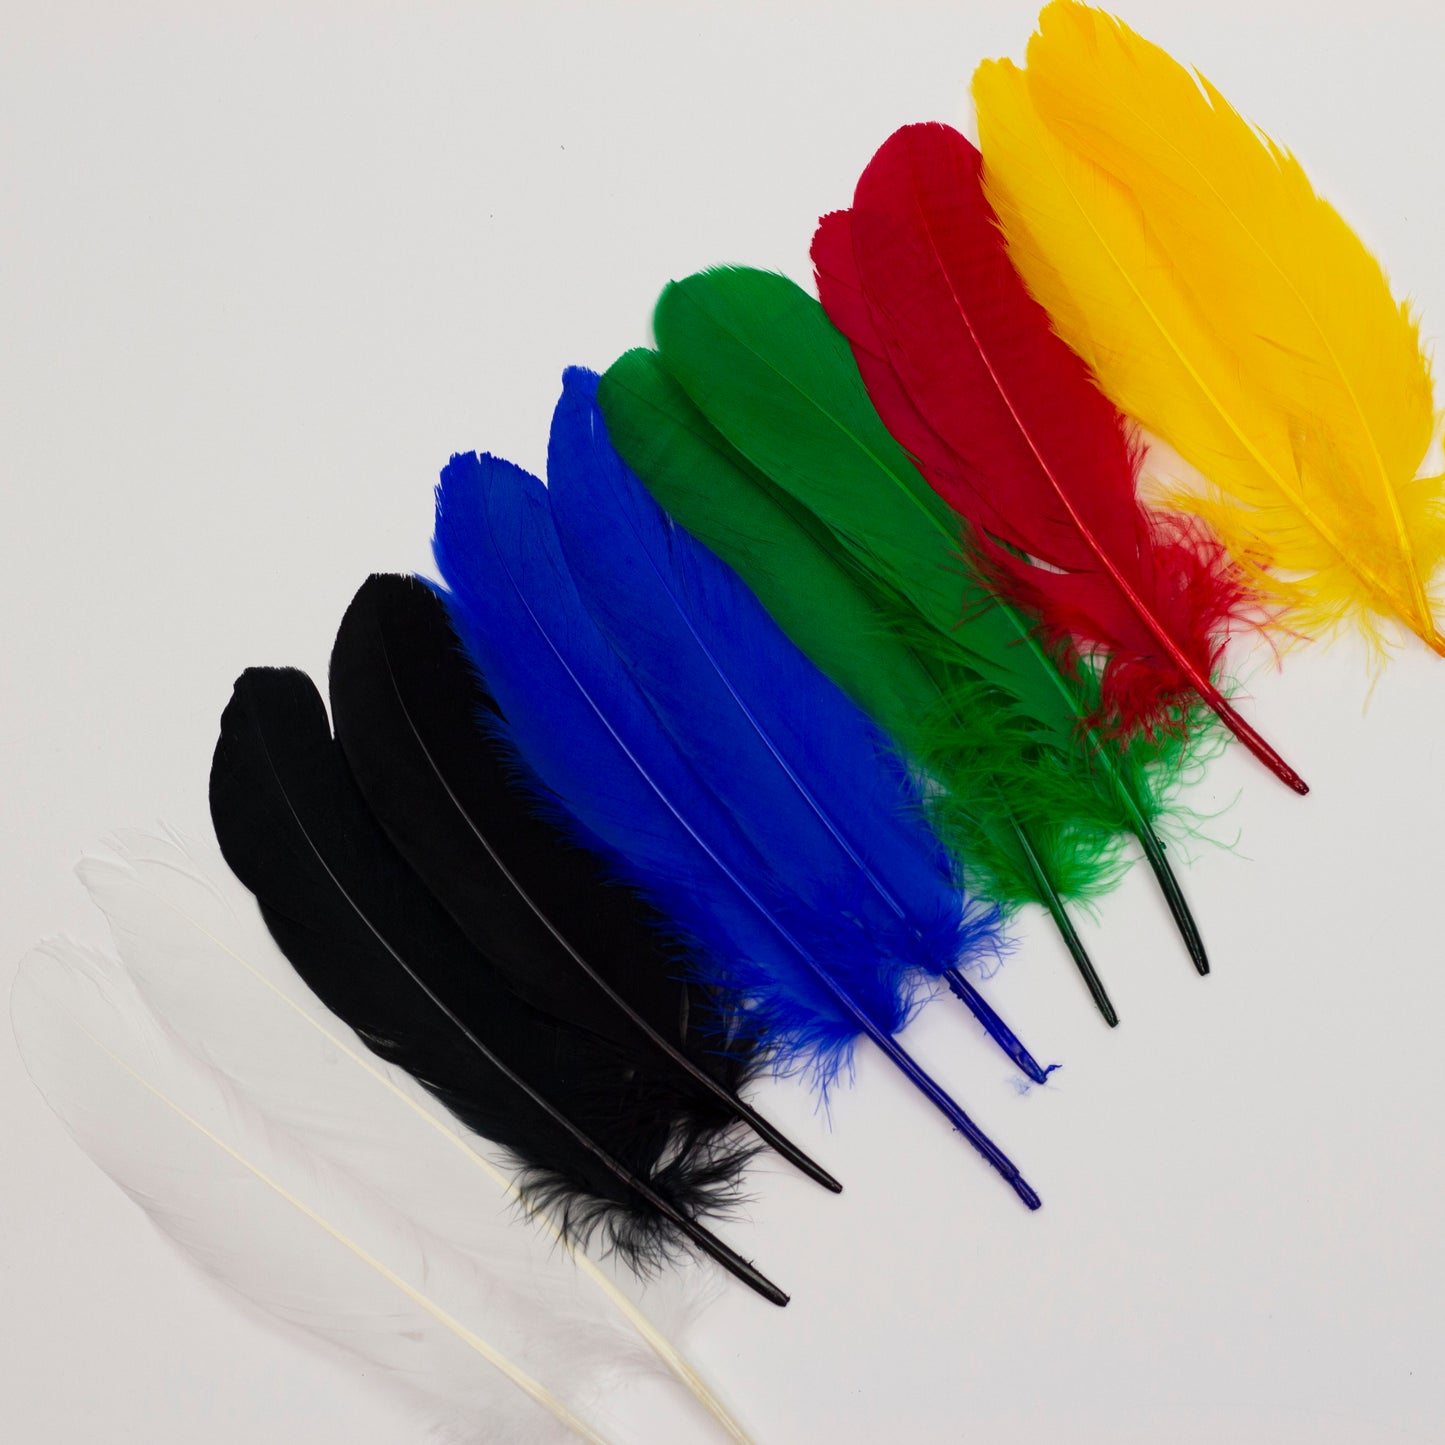 Goose Feathers 7-8" - 12 pcs - Assorted Mix